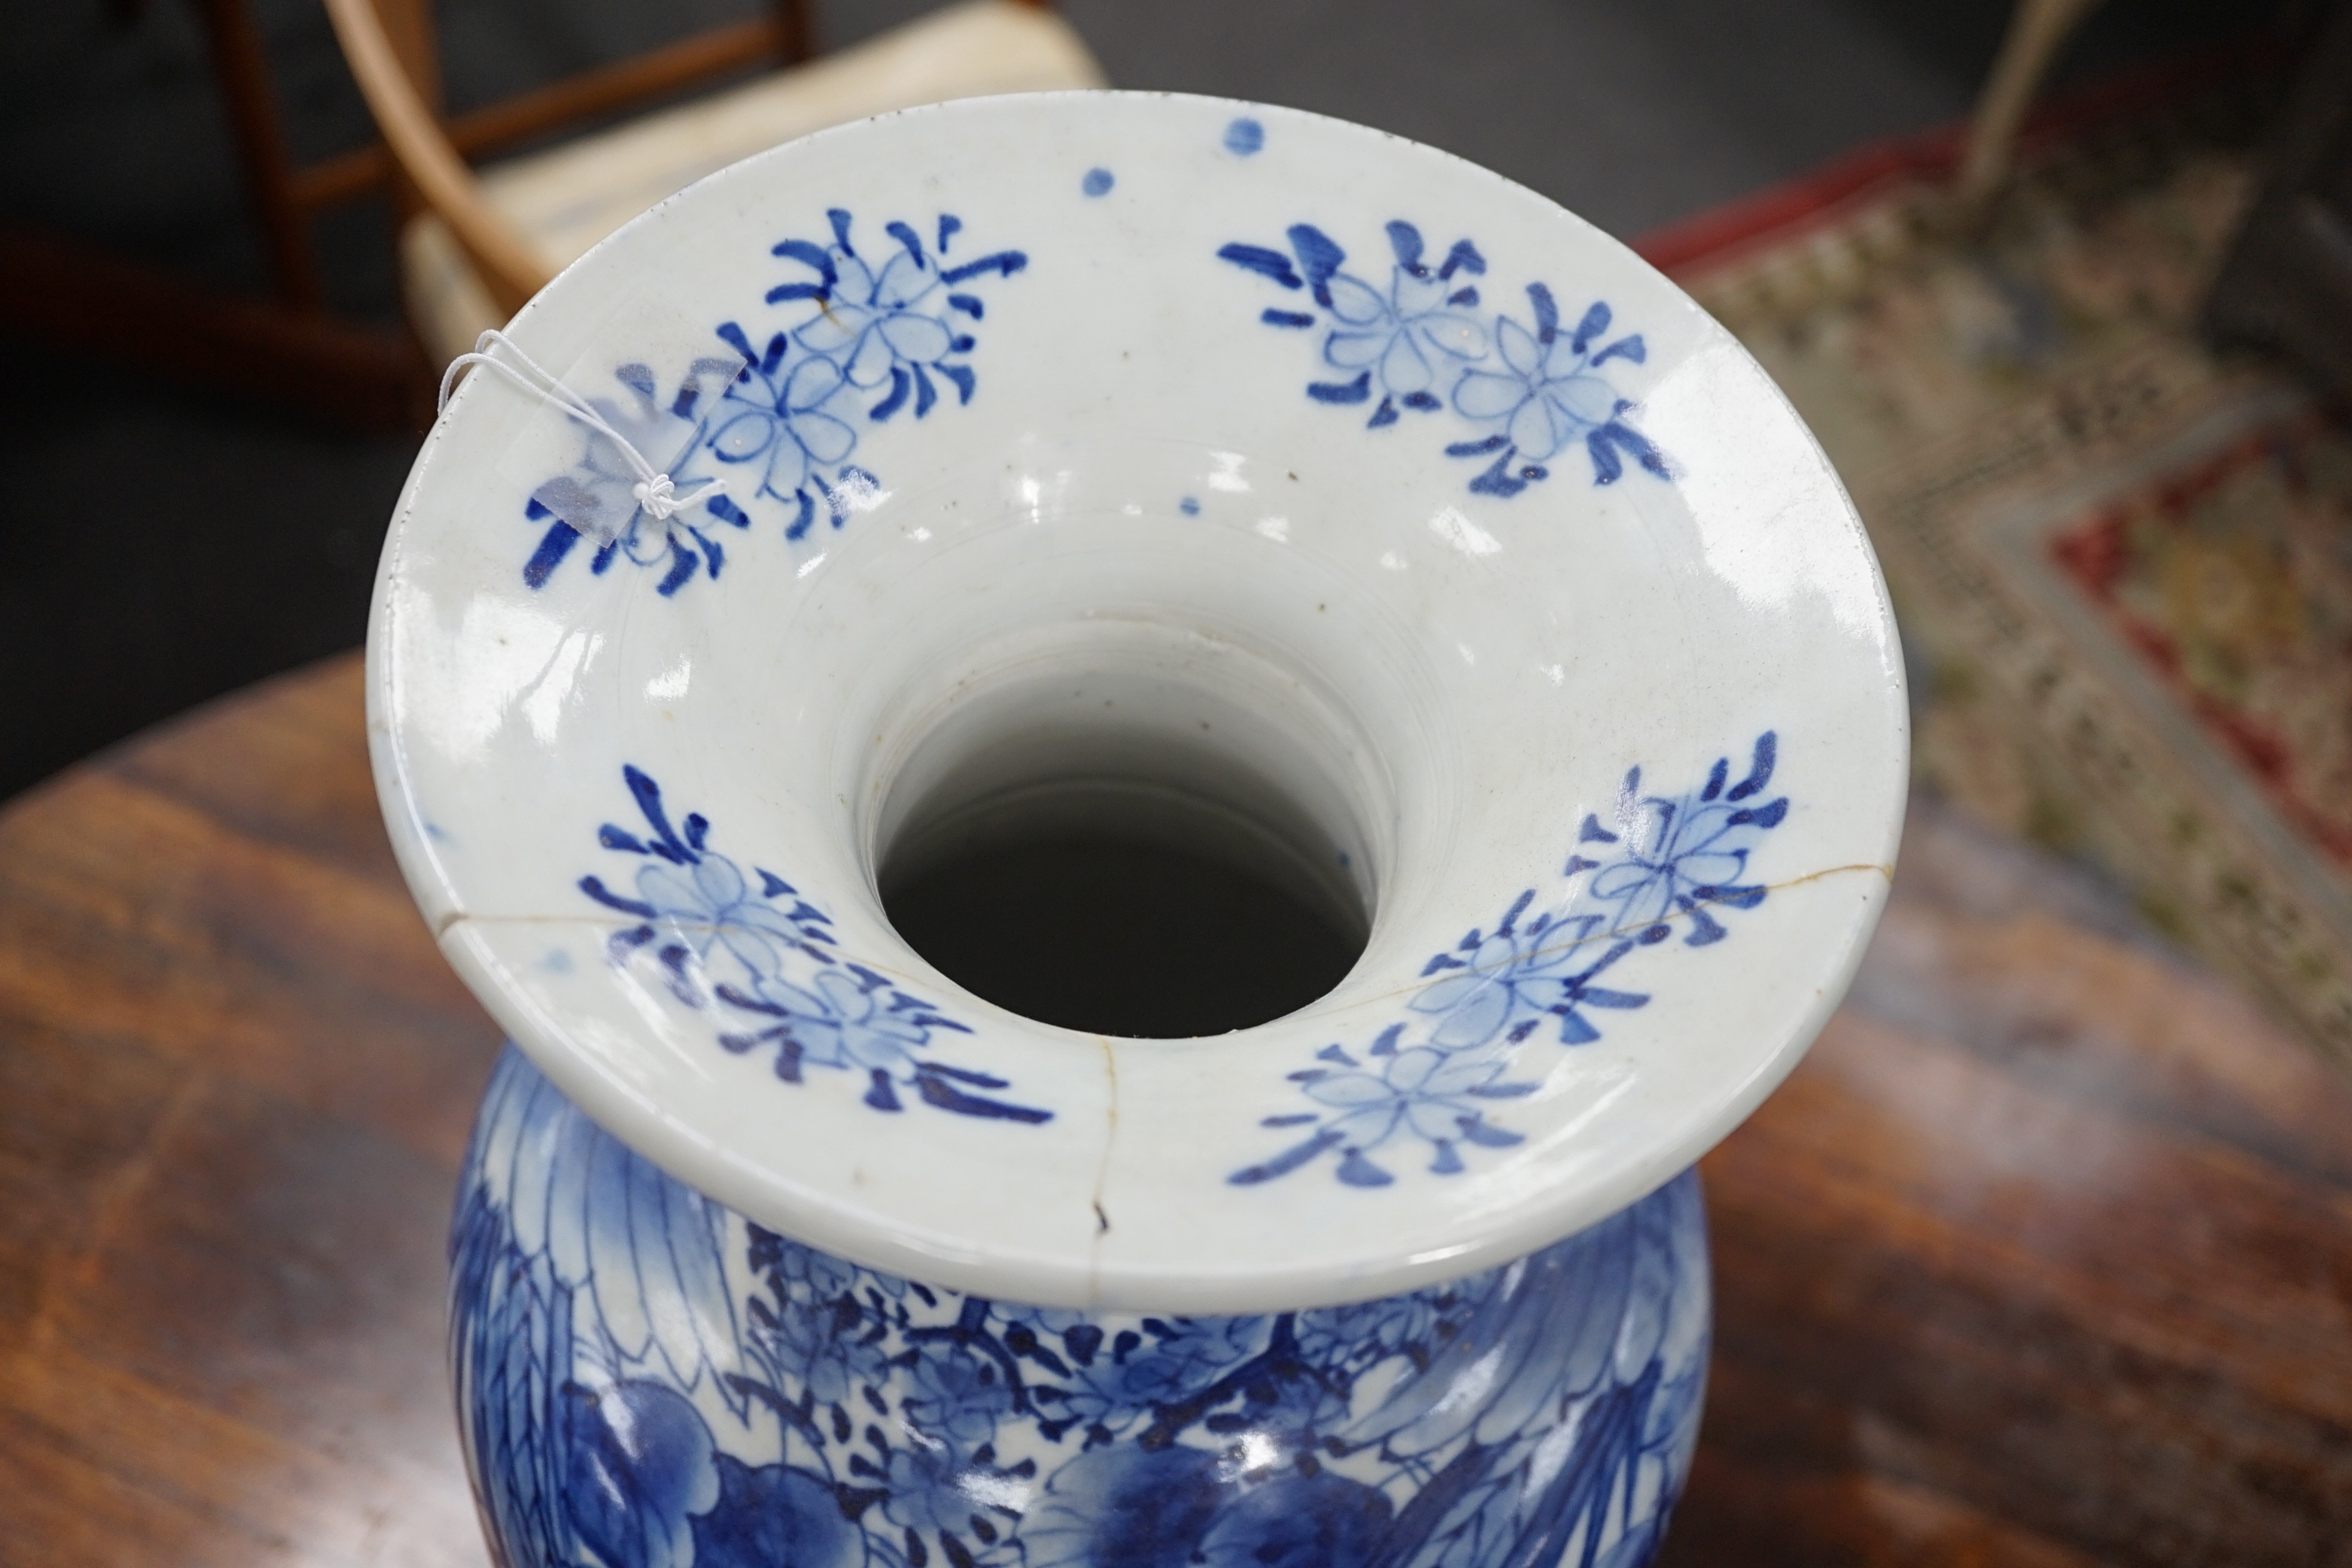 A Japanese blue and white vase-61 cms high.